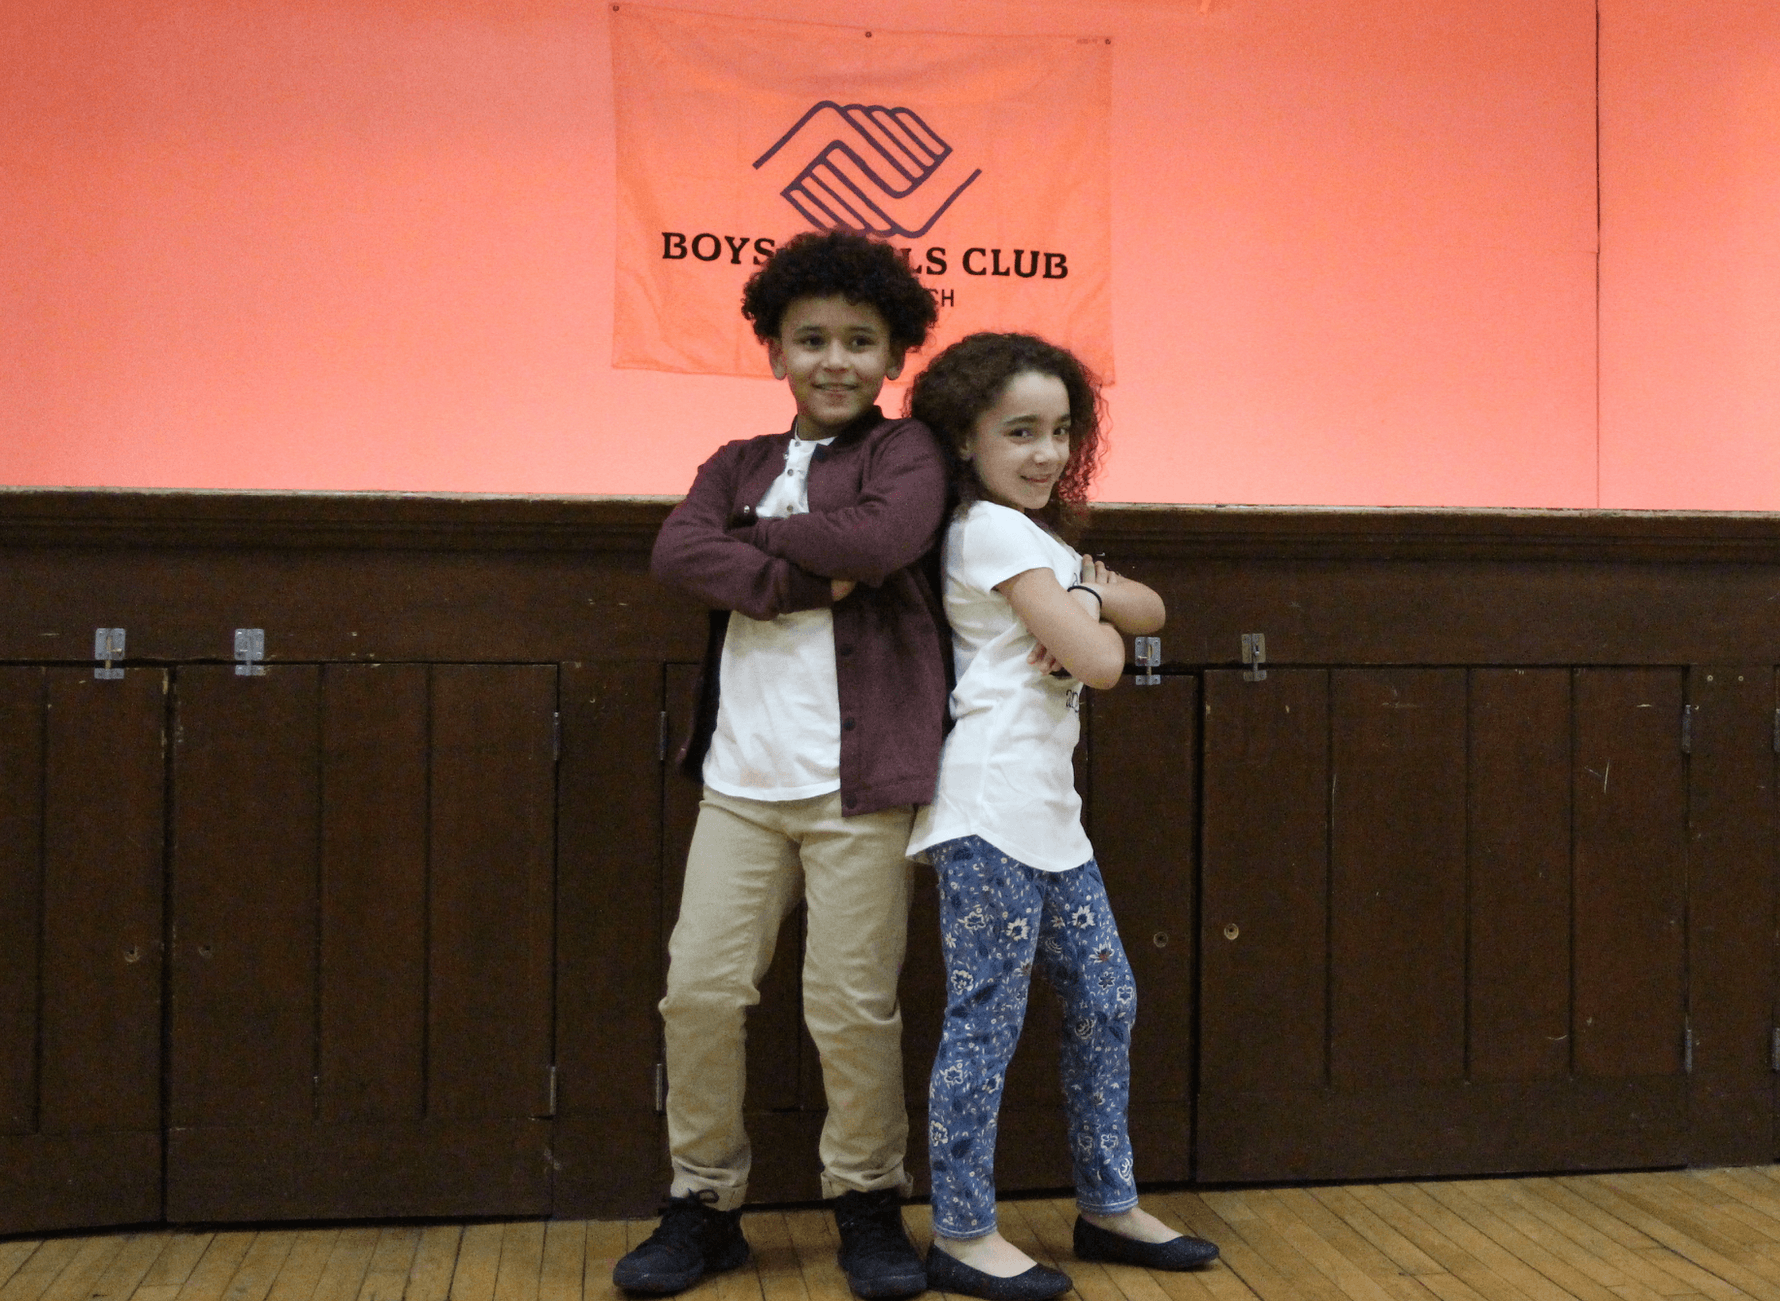 At the Boys & Girls Club of Greenwich, kids modeled Old Navy outfits for friends and family on Friday Jan 26, 2018 Photo: Leslie Yager